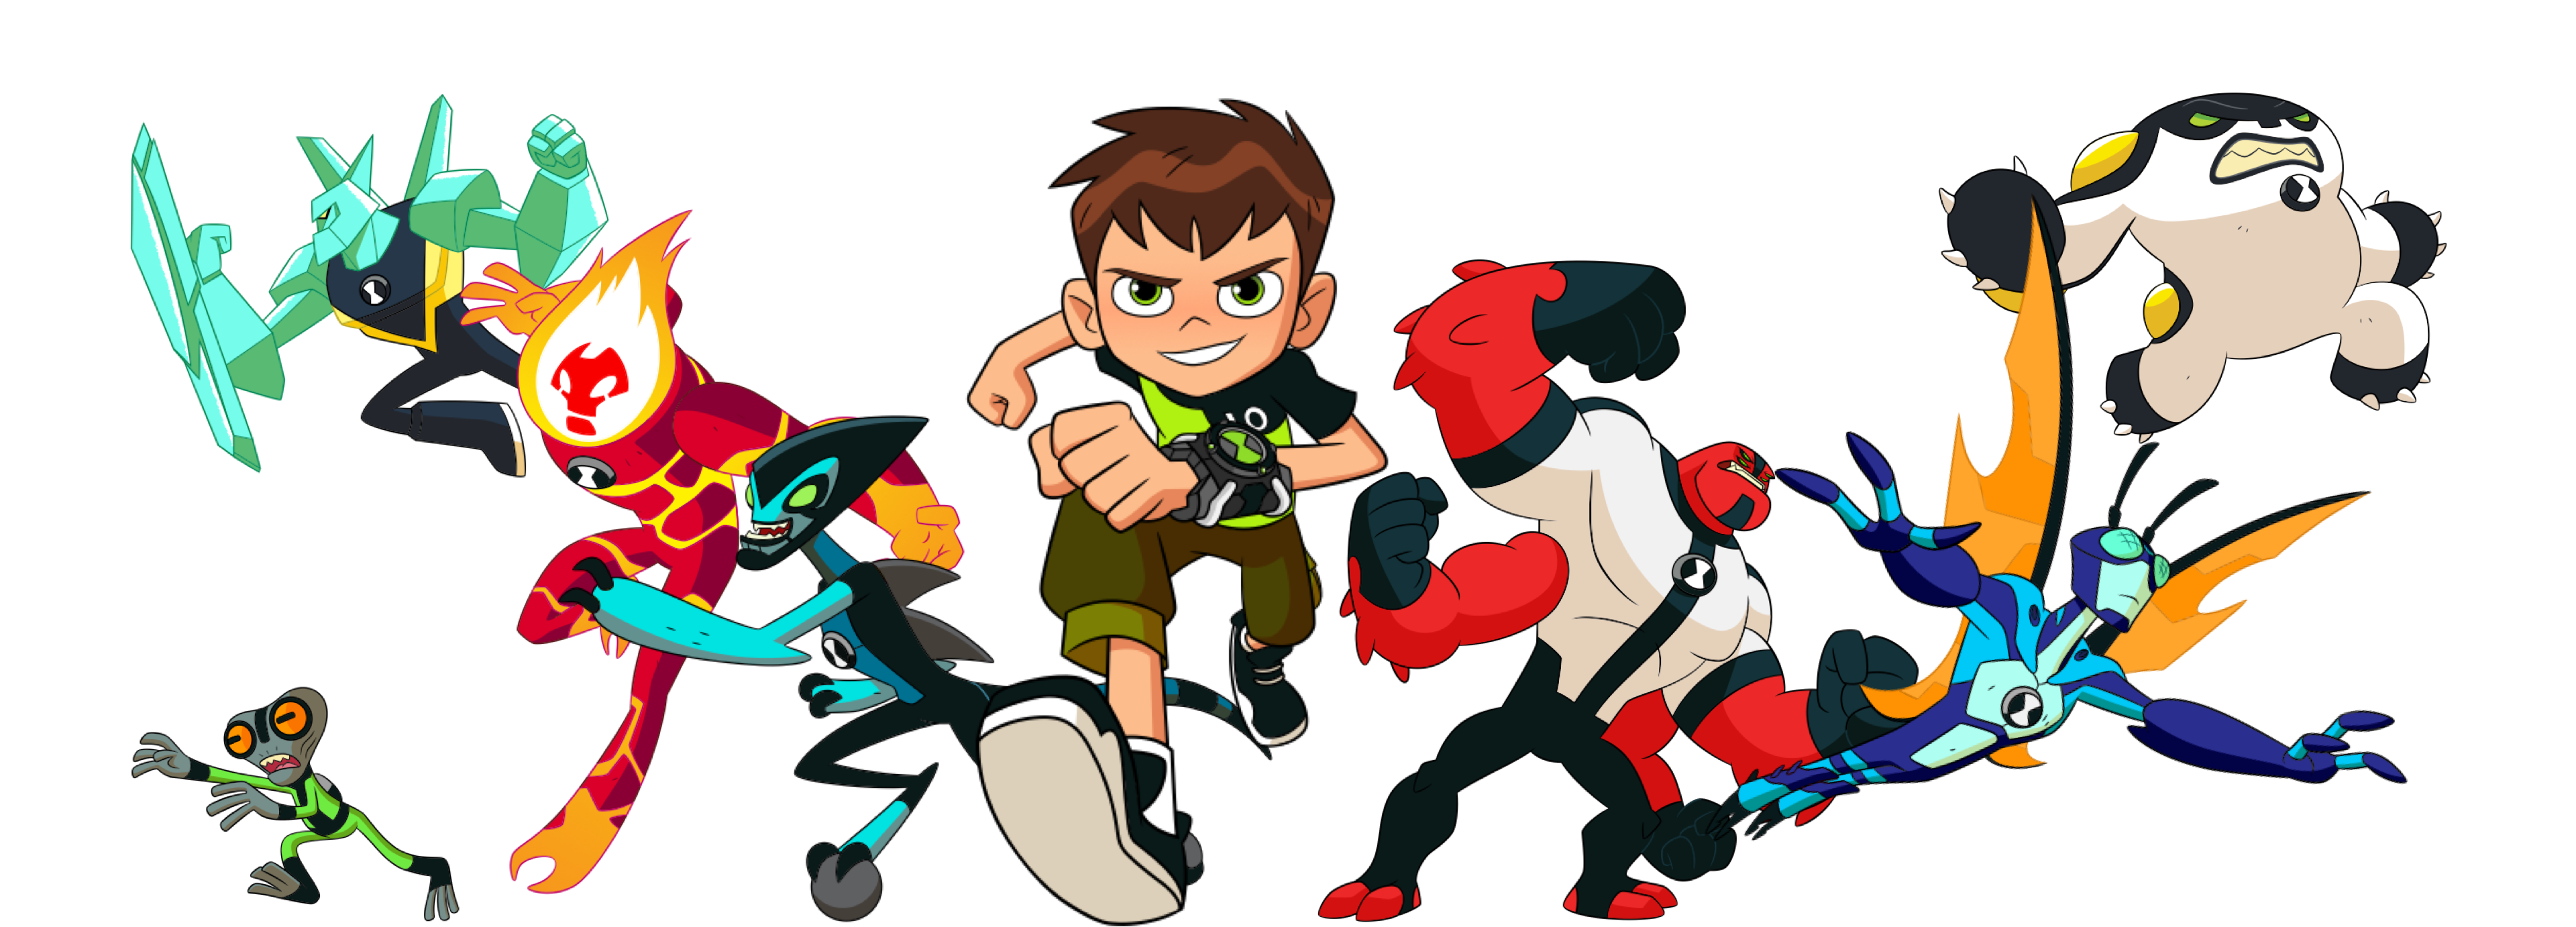 arlene jovellanos recommends ben 10 pictures pic